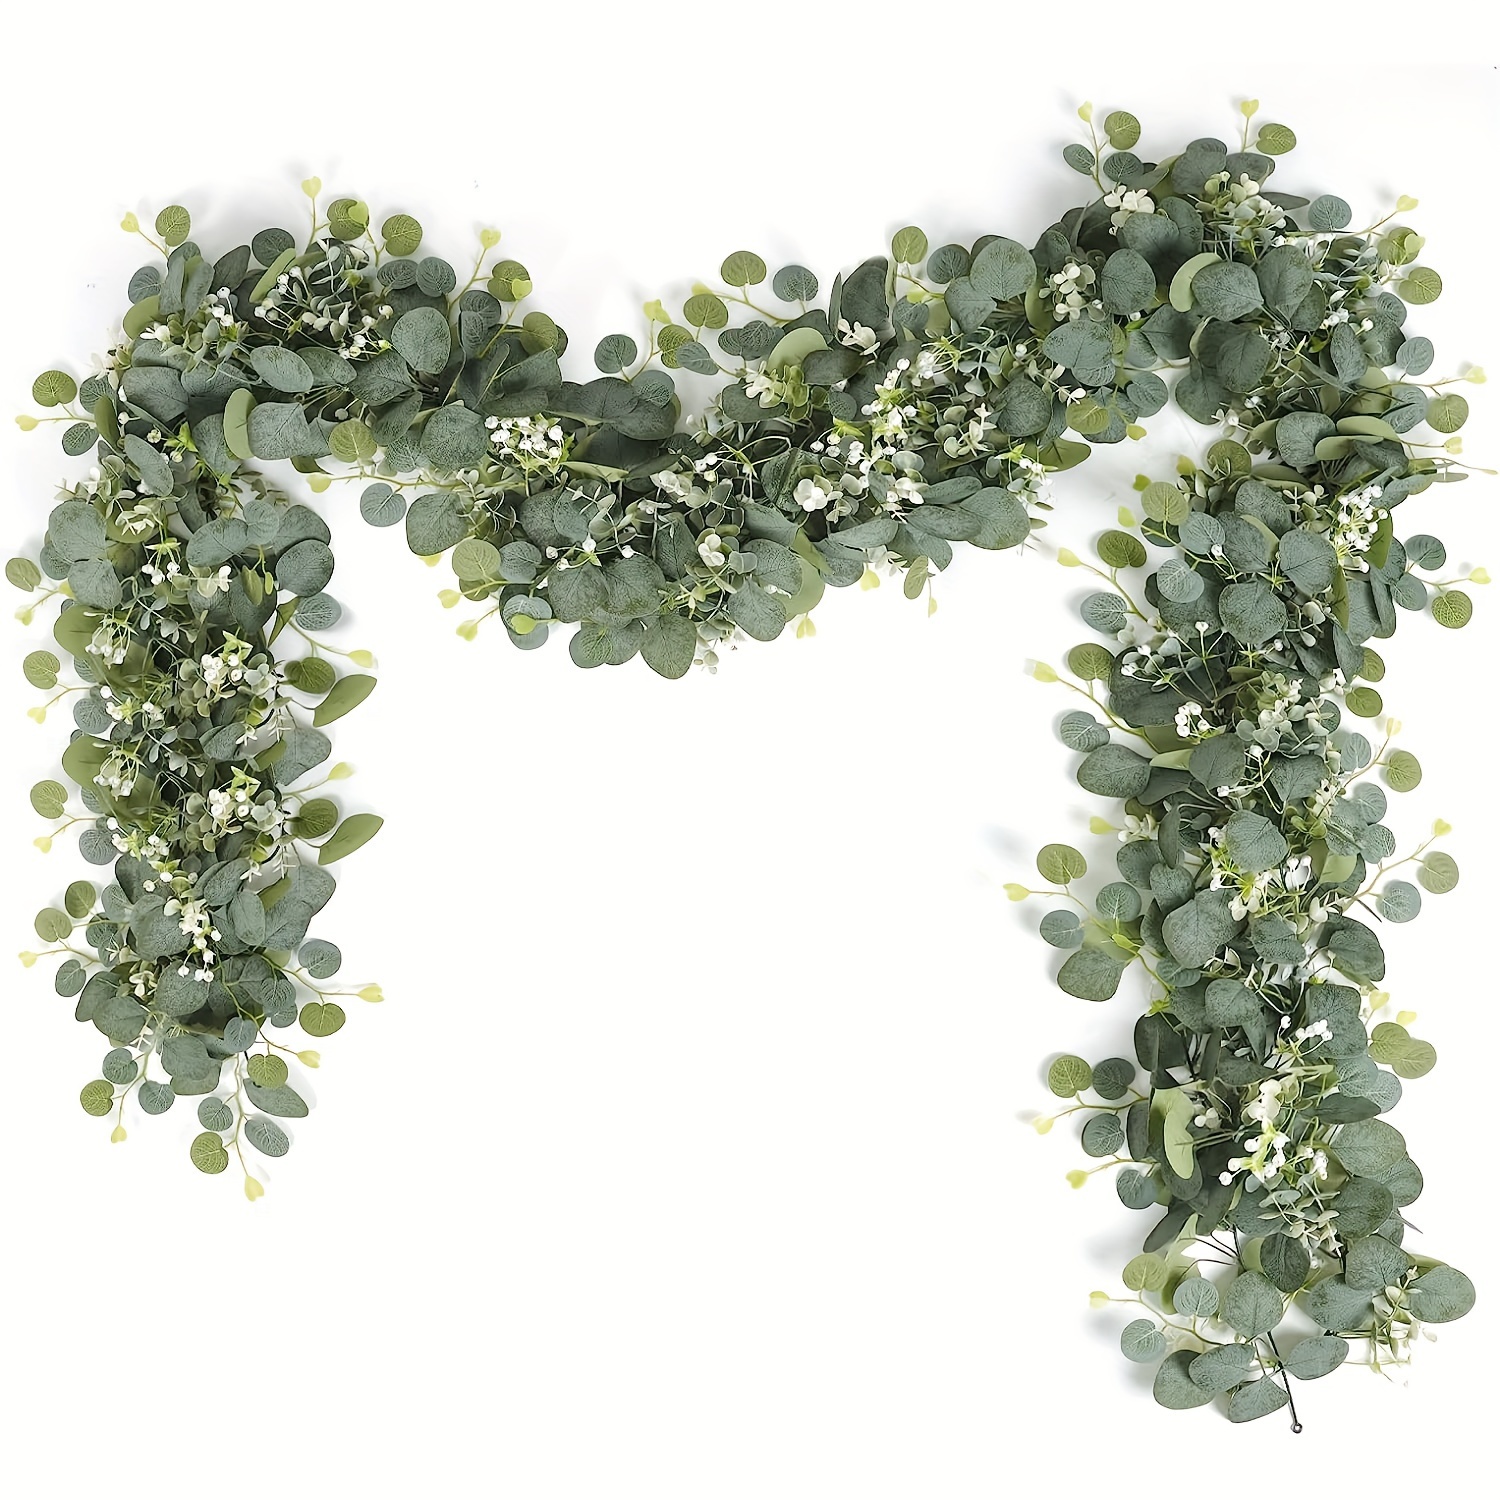 

1 Pack Artificial Faux Greenery Garland Vines, Eucalyptus Leaves Decor Rattan For Valentine's Day Decor, Suitable For Wedding Party Home Decor, Fake Green Vine For Tablecloths And Home Decoration